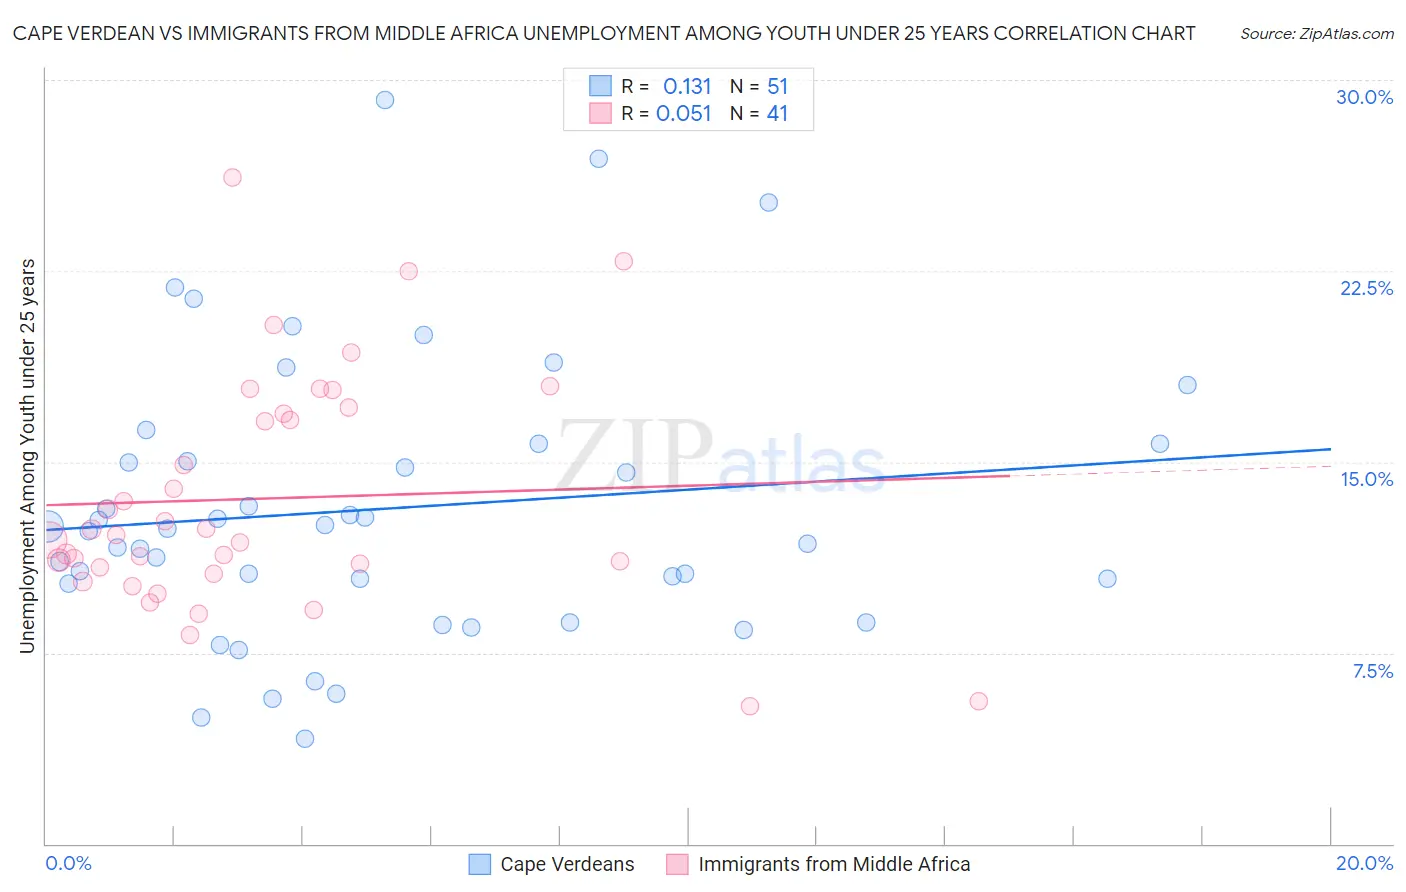 Cape Verdean vs Immigrants from Middle Africa Unemployment Among Youth under 25 years